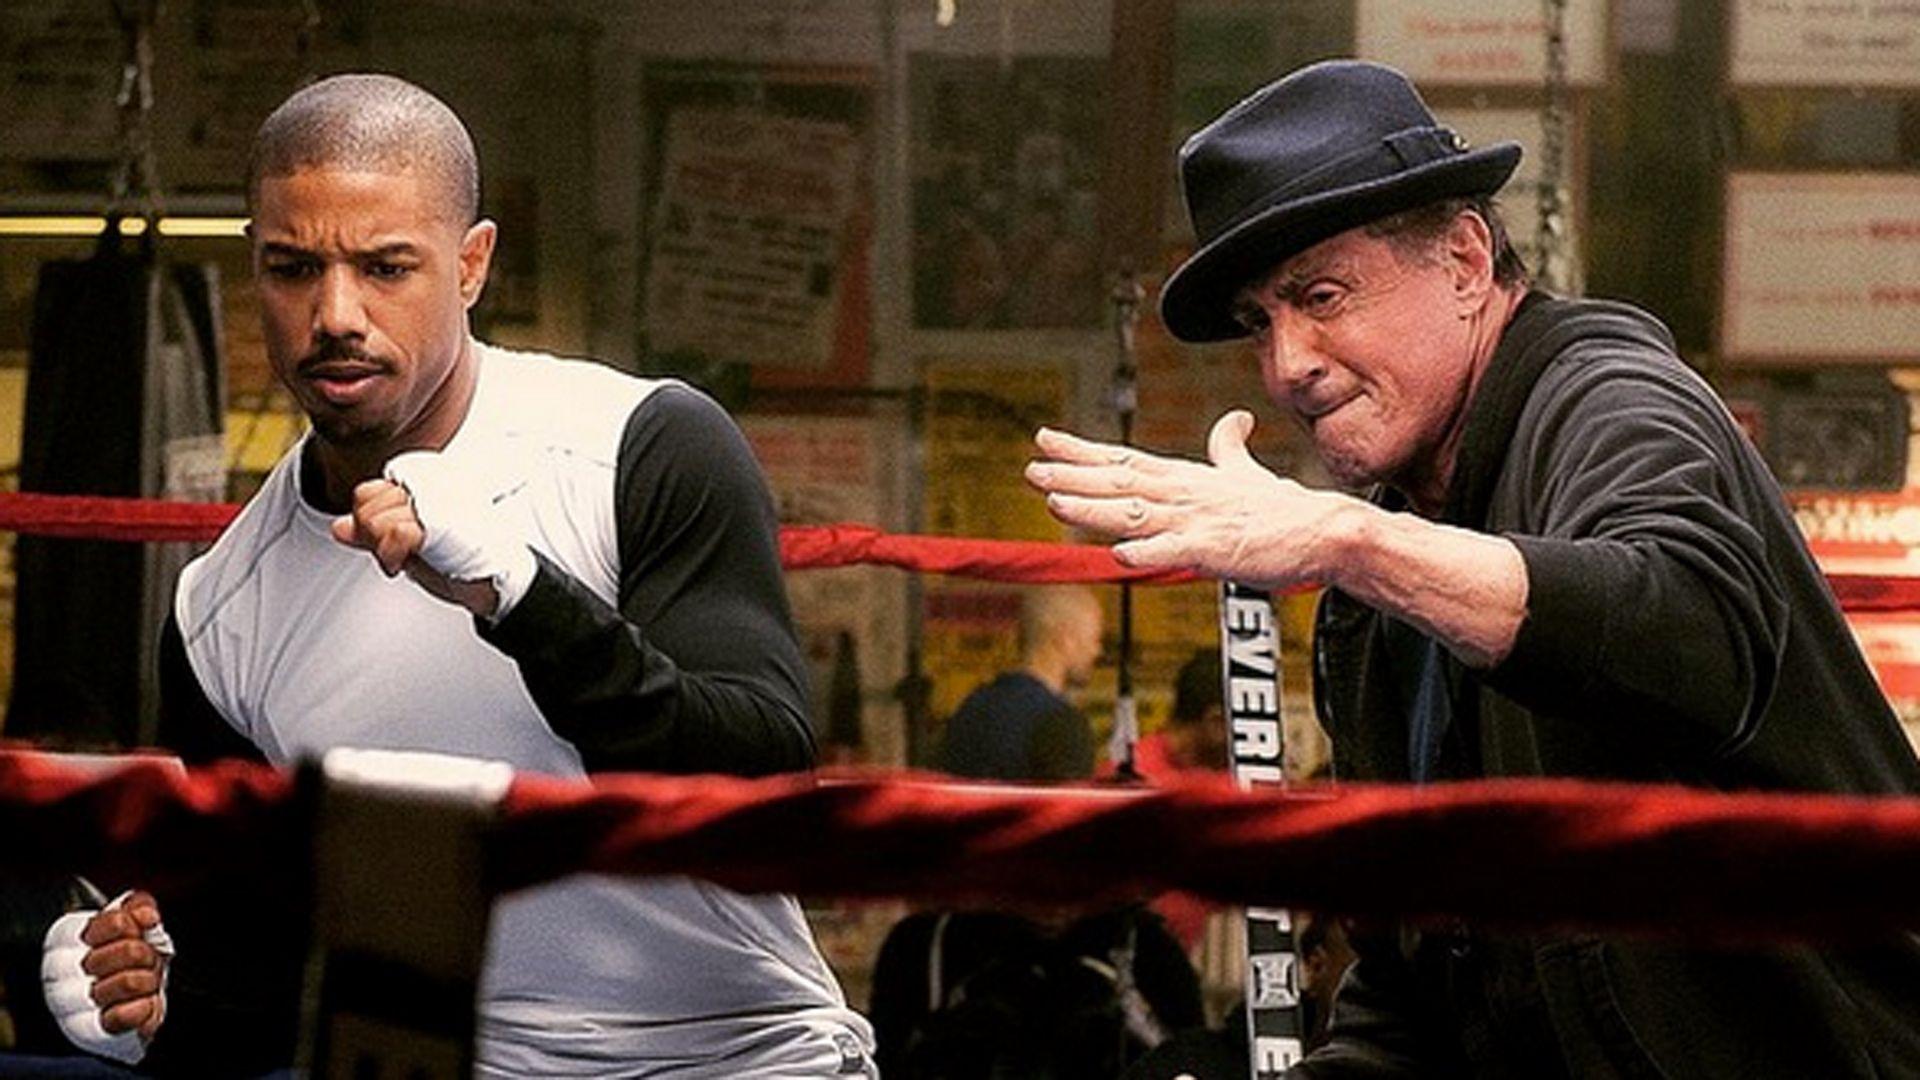 Sylvester Stallone posts photo of Apollo Creed's son from set of new